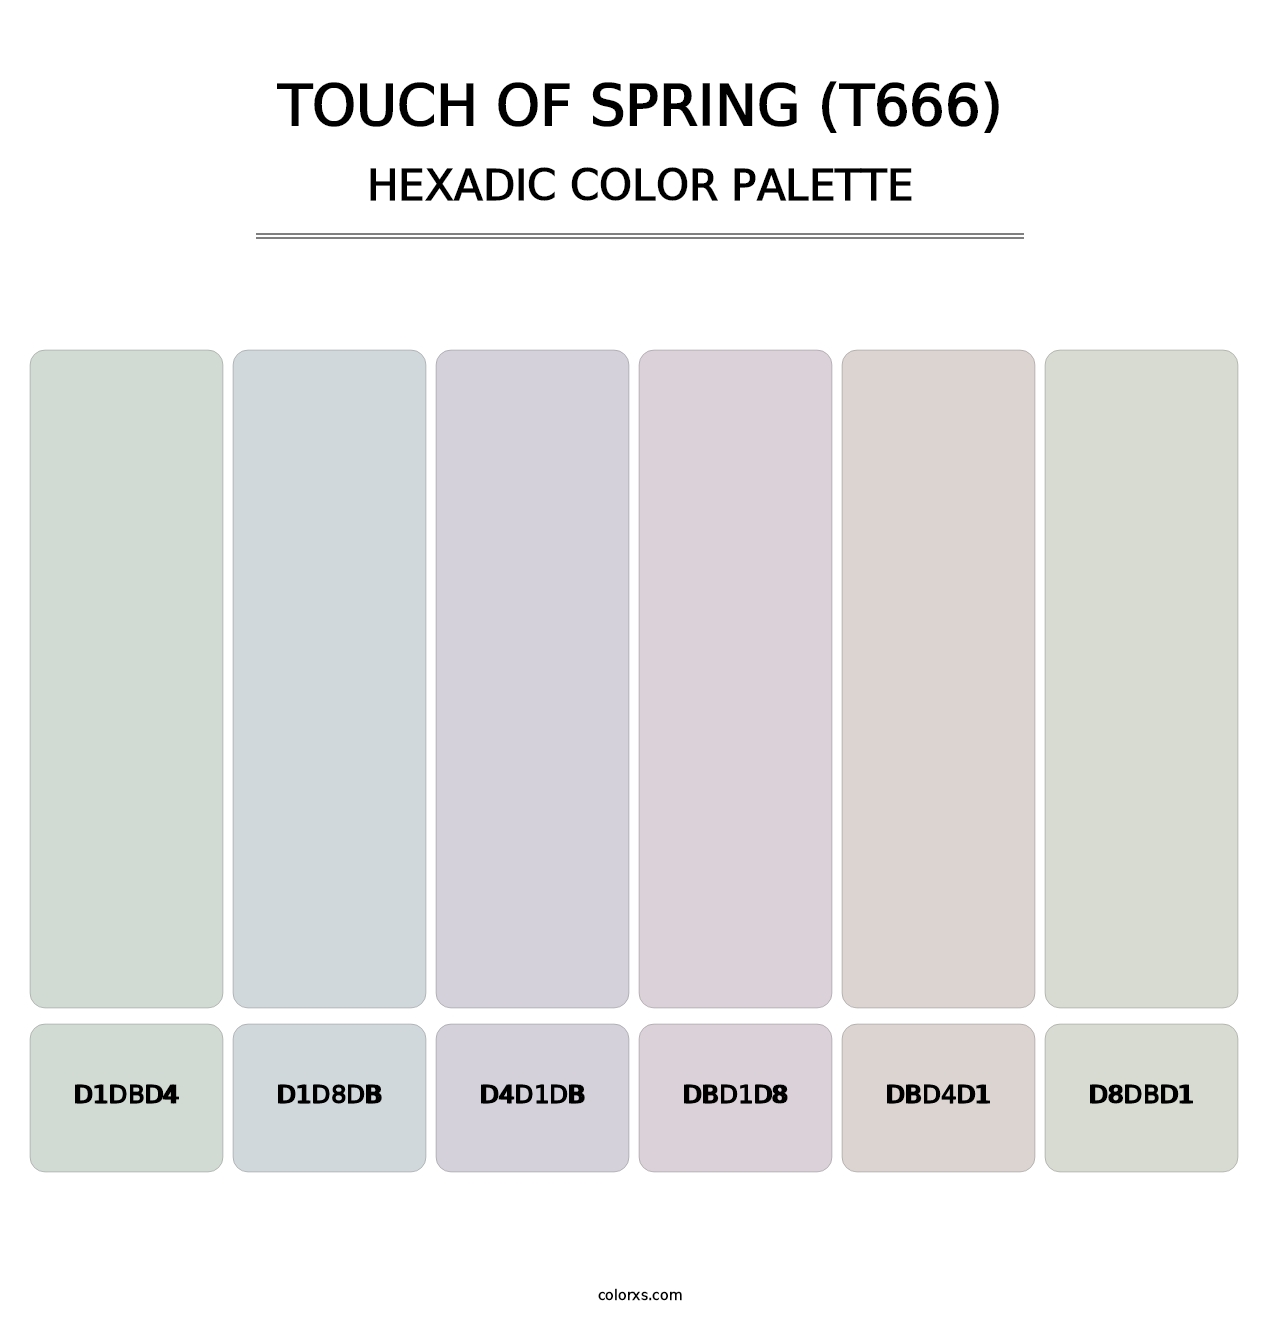 Touch of Spring (T666) - Hexadic Color Palette